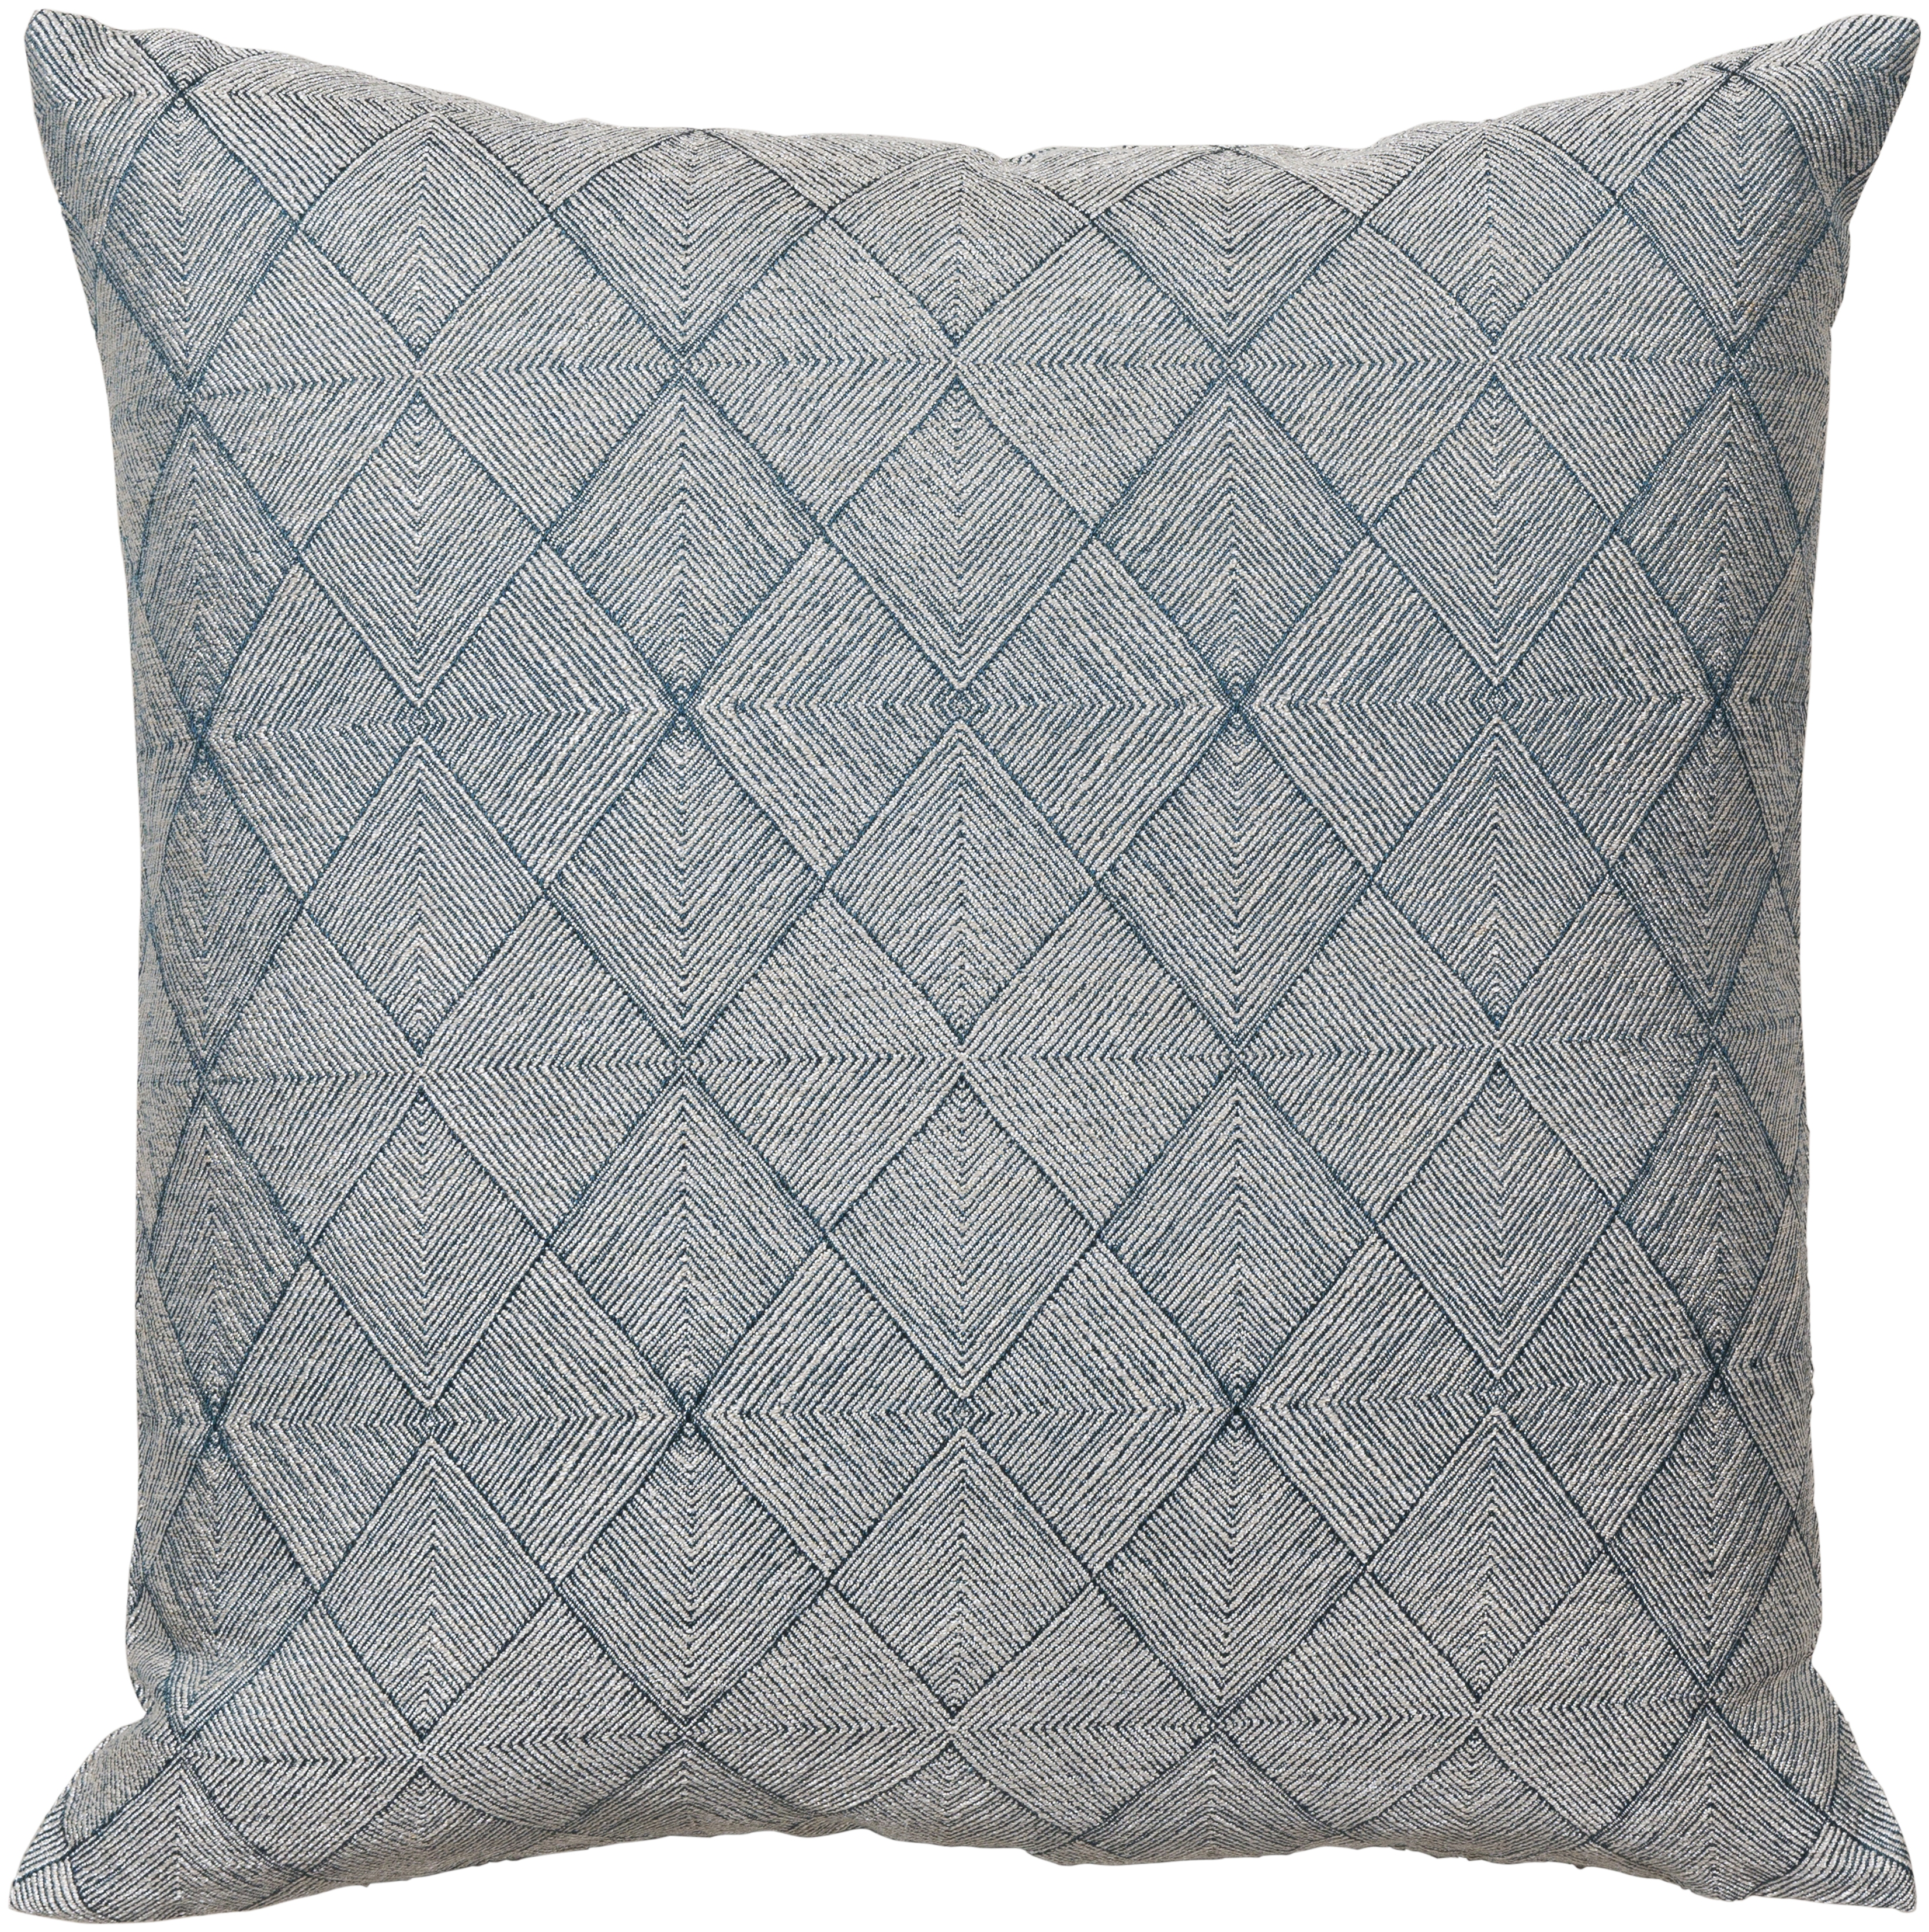 Messina Pillow Cover, 22" x 22", Teal & Champagne - Image 0